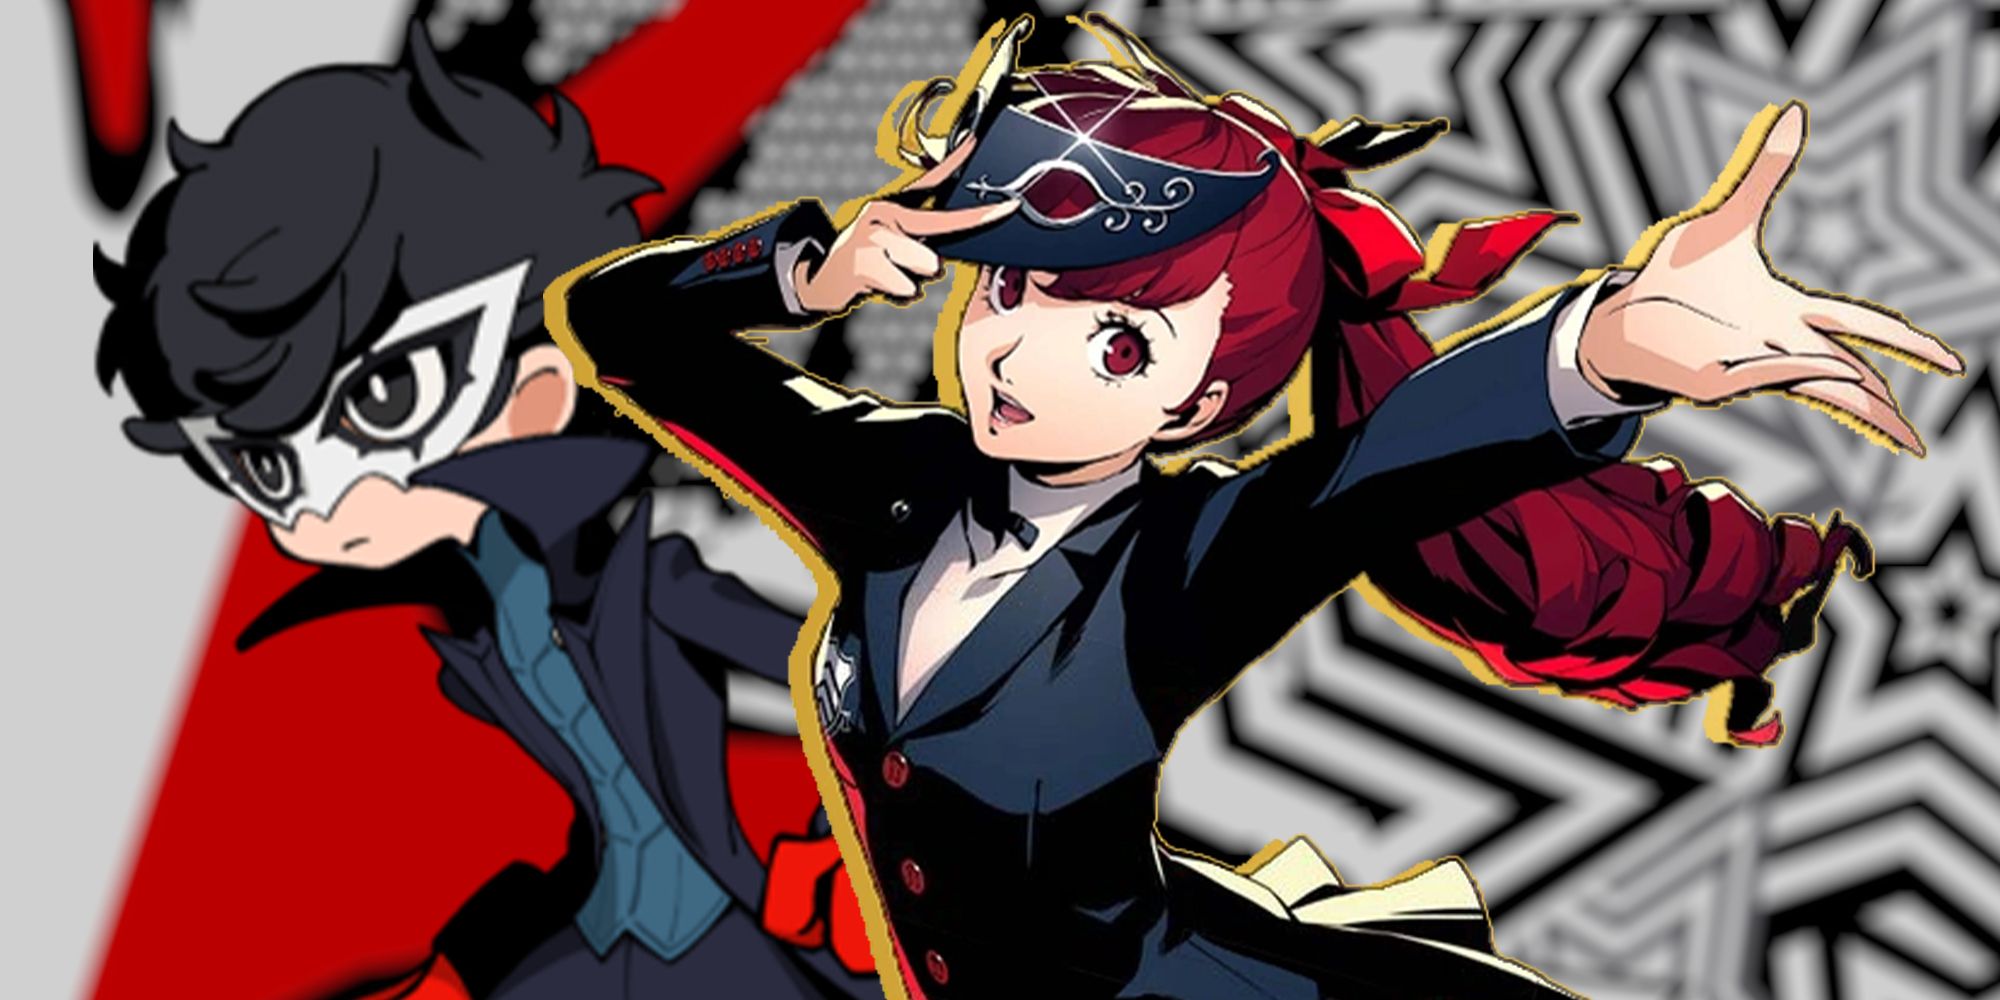 Best characters in Persona 5 Tactica, ranked